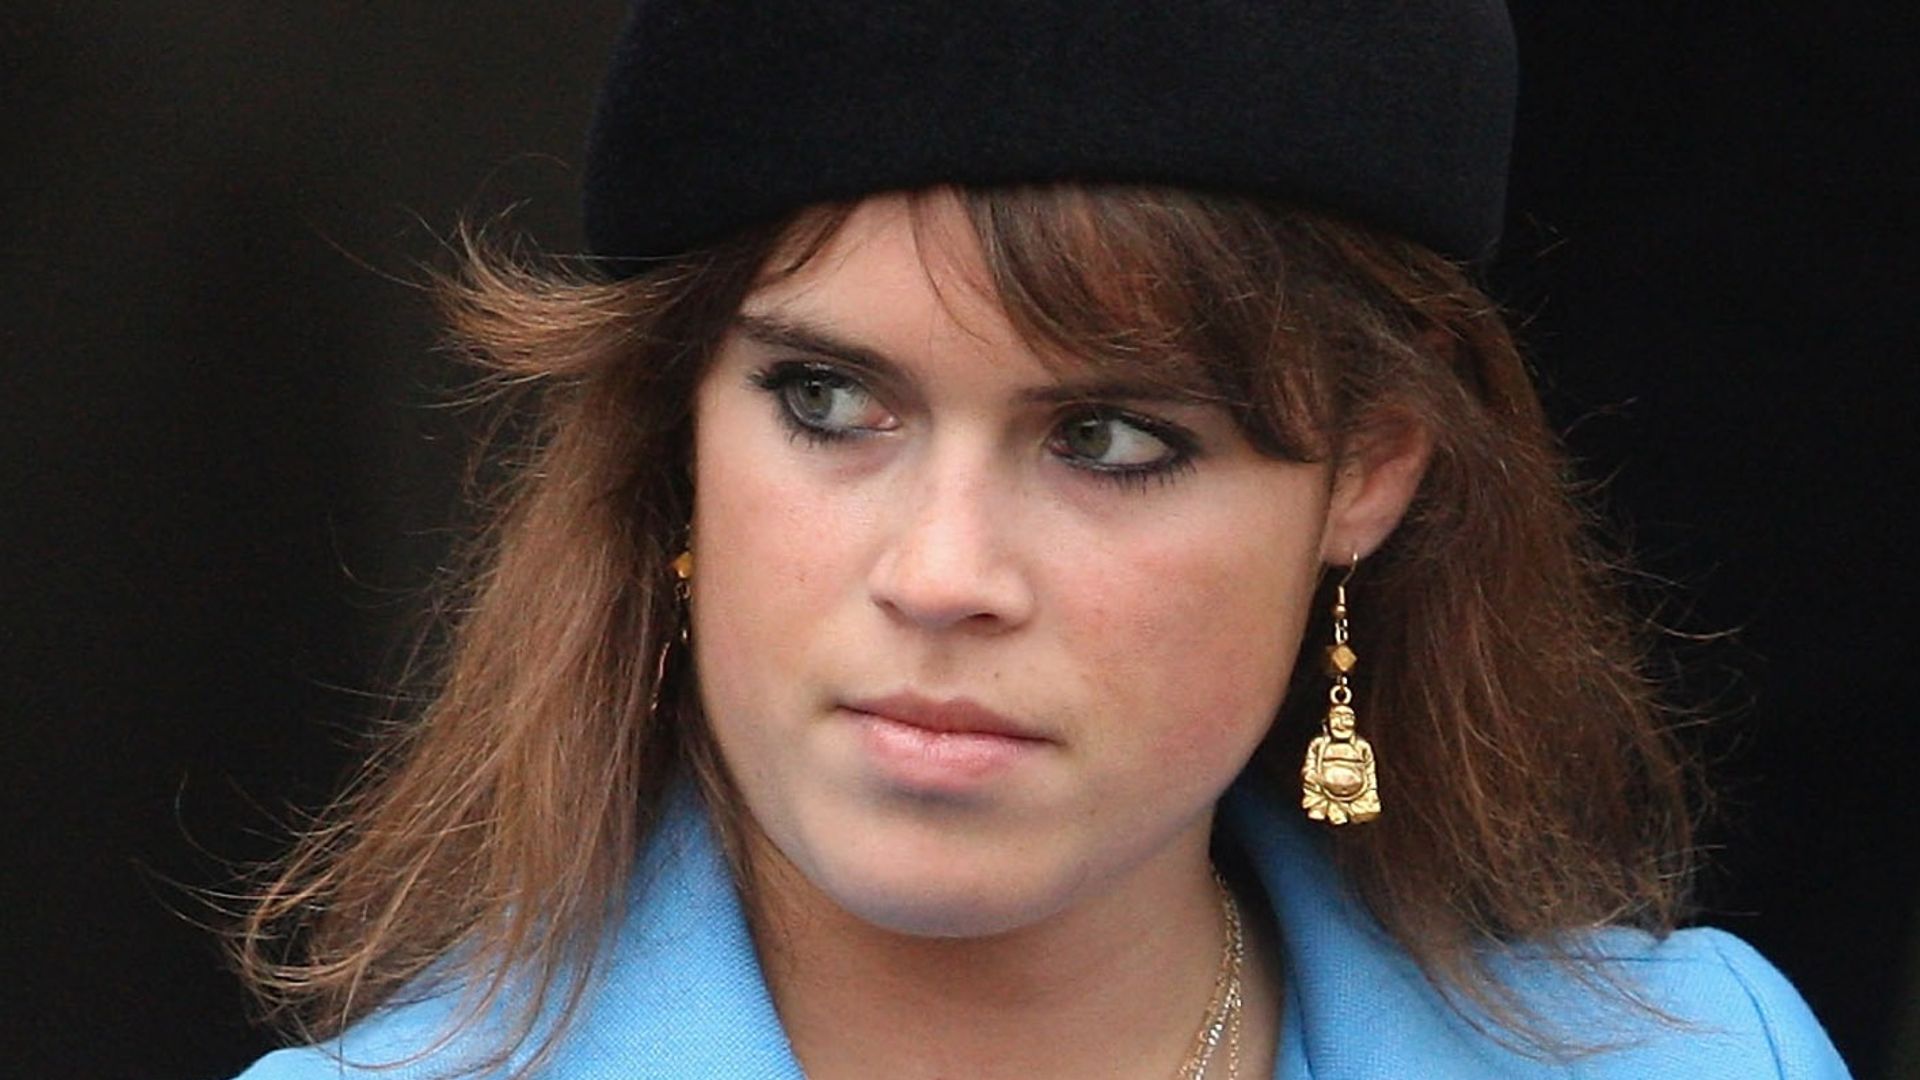 Princess Eugenie attends the Christmas Day church service at St Mary's Church on December 25, 2008 in Sandringham, England.  (Photo by Chris Jackson/Getty Images)5:  